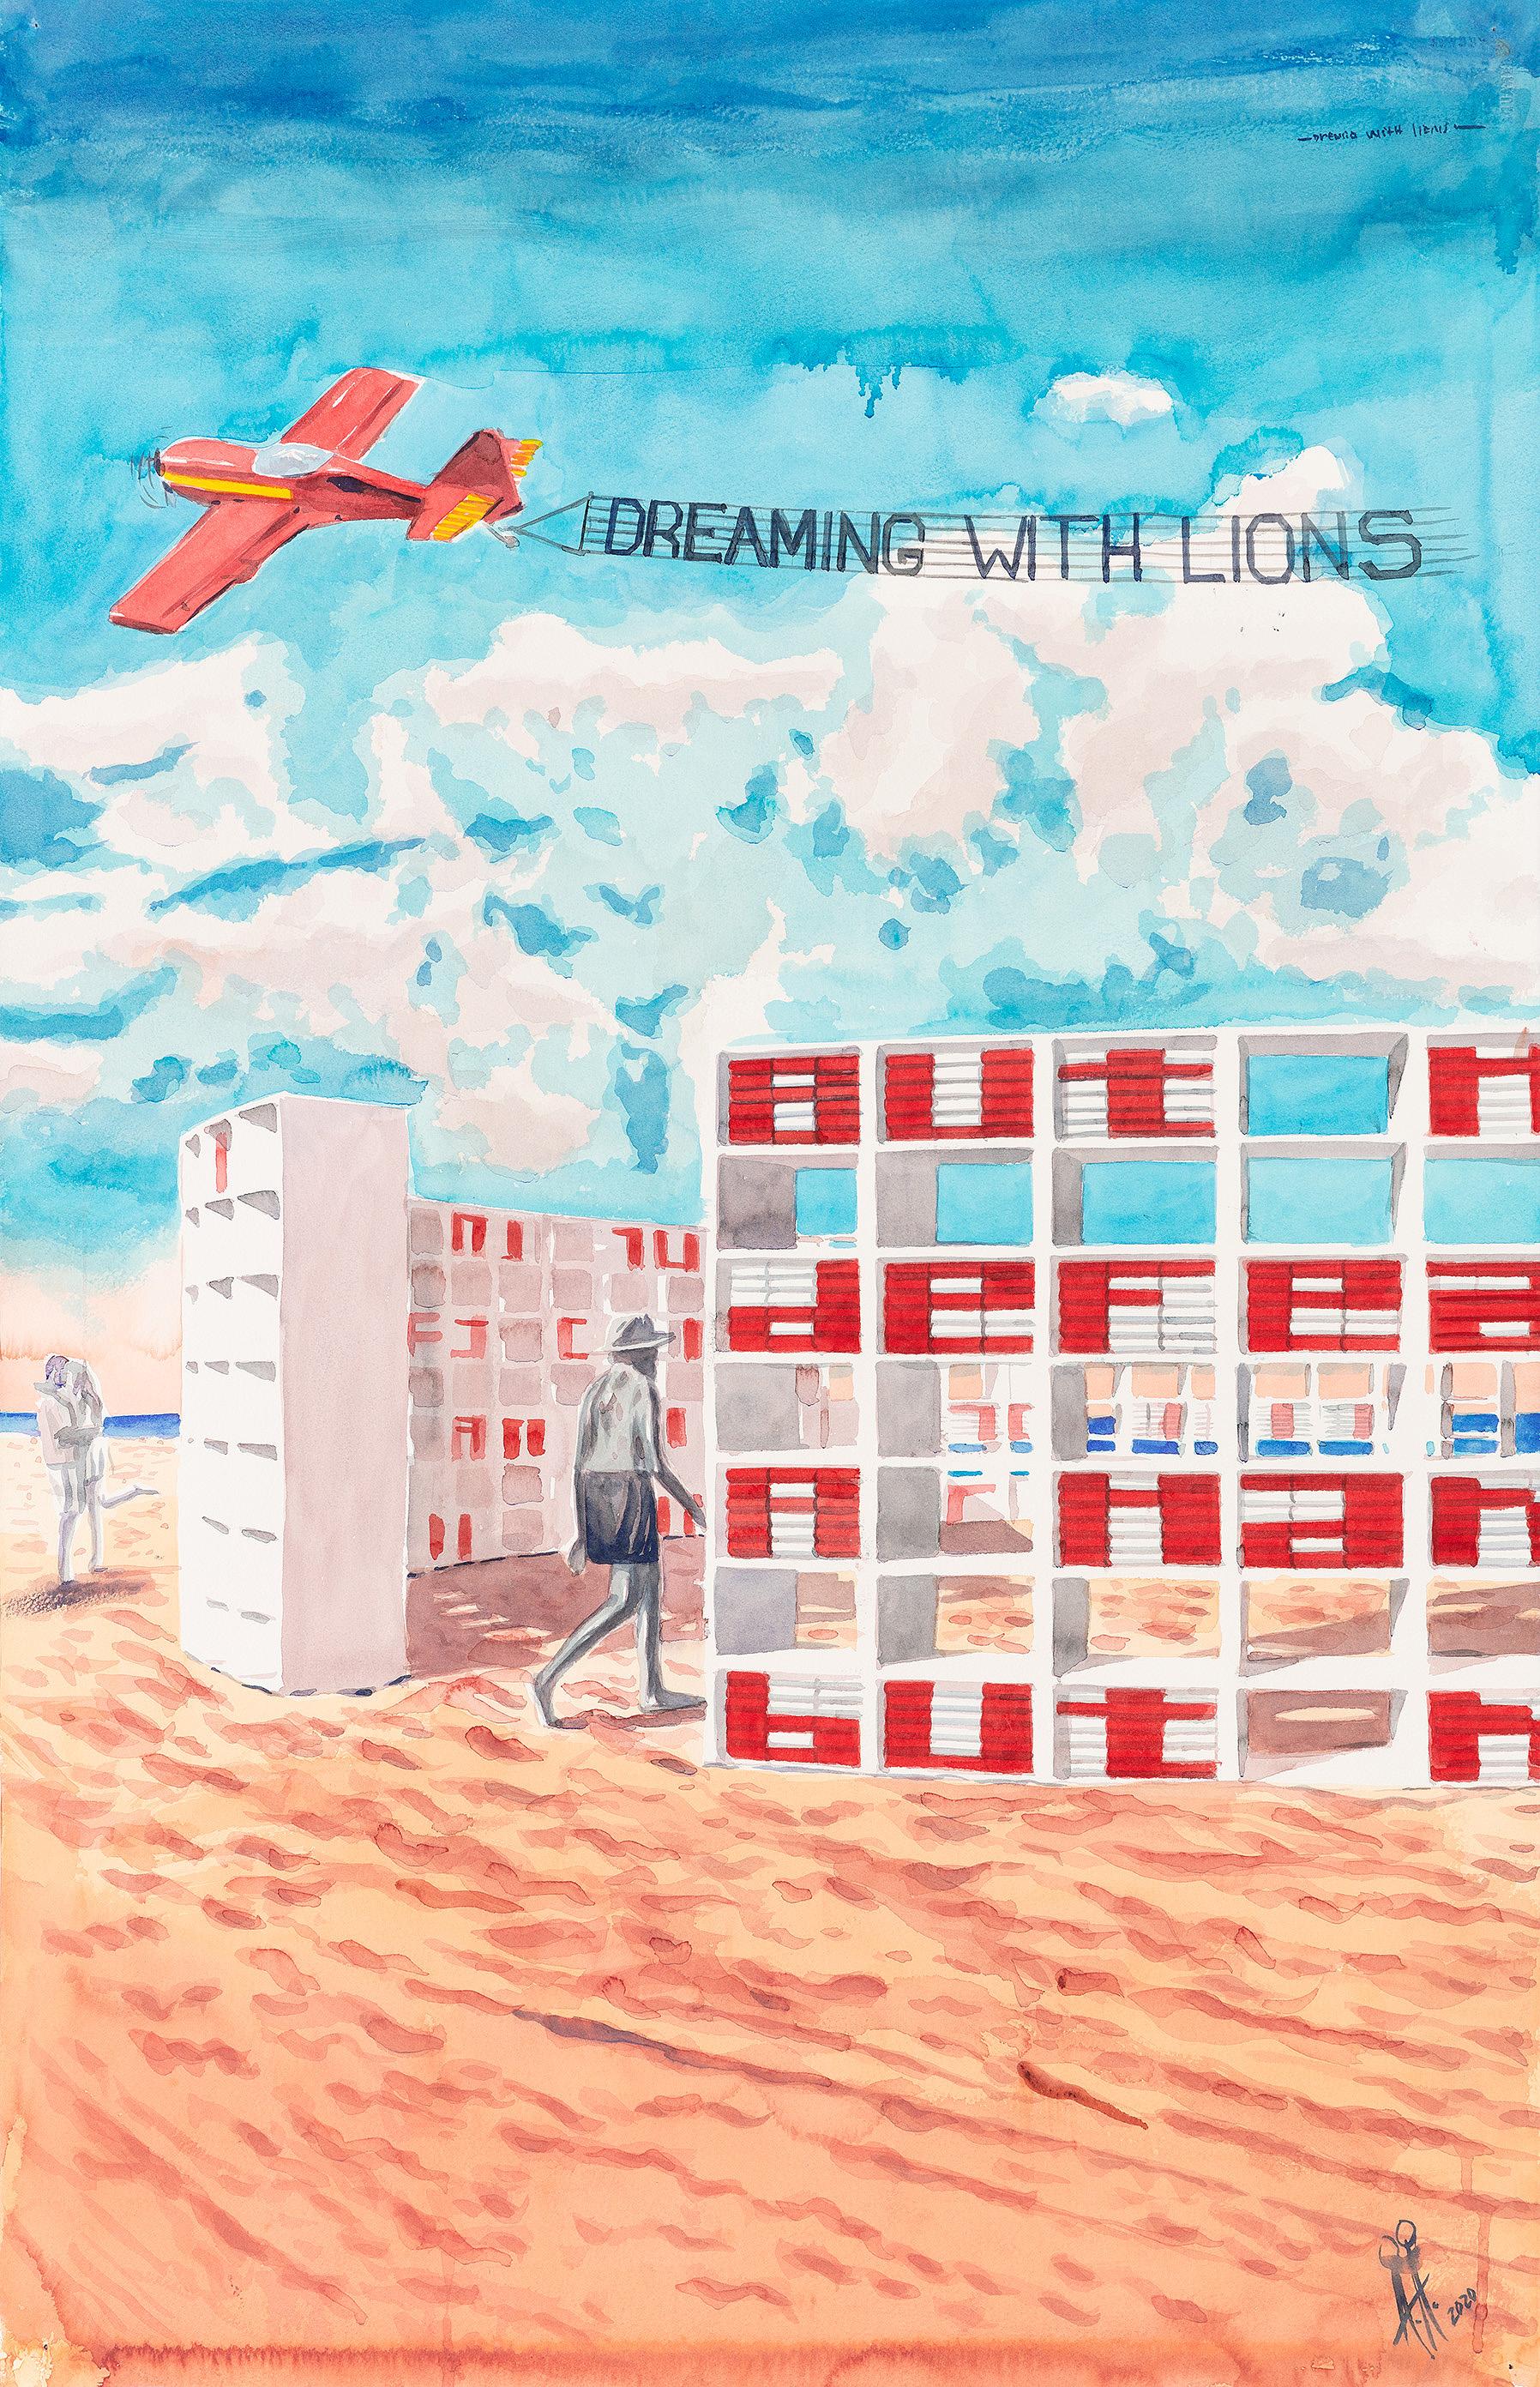 General Opening: Dreaming with Lions